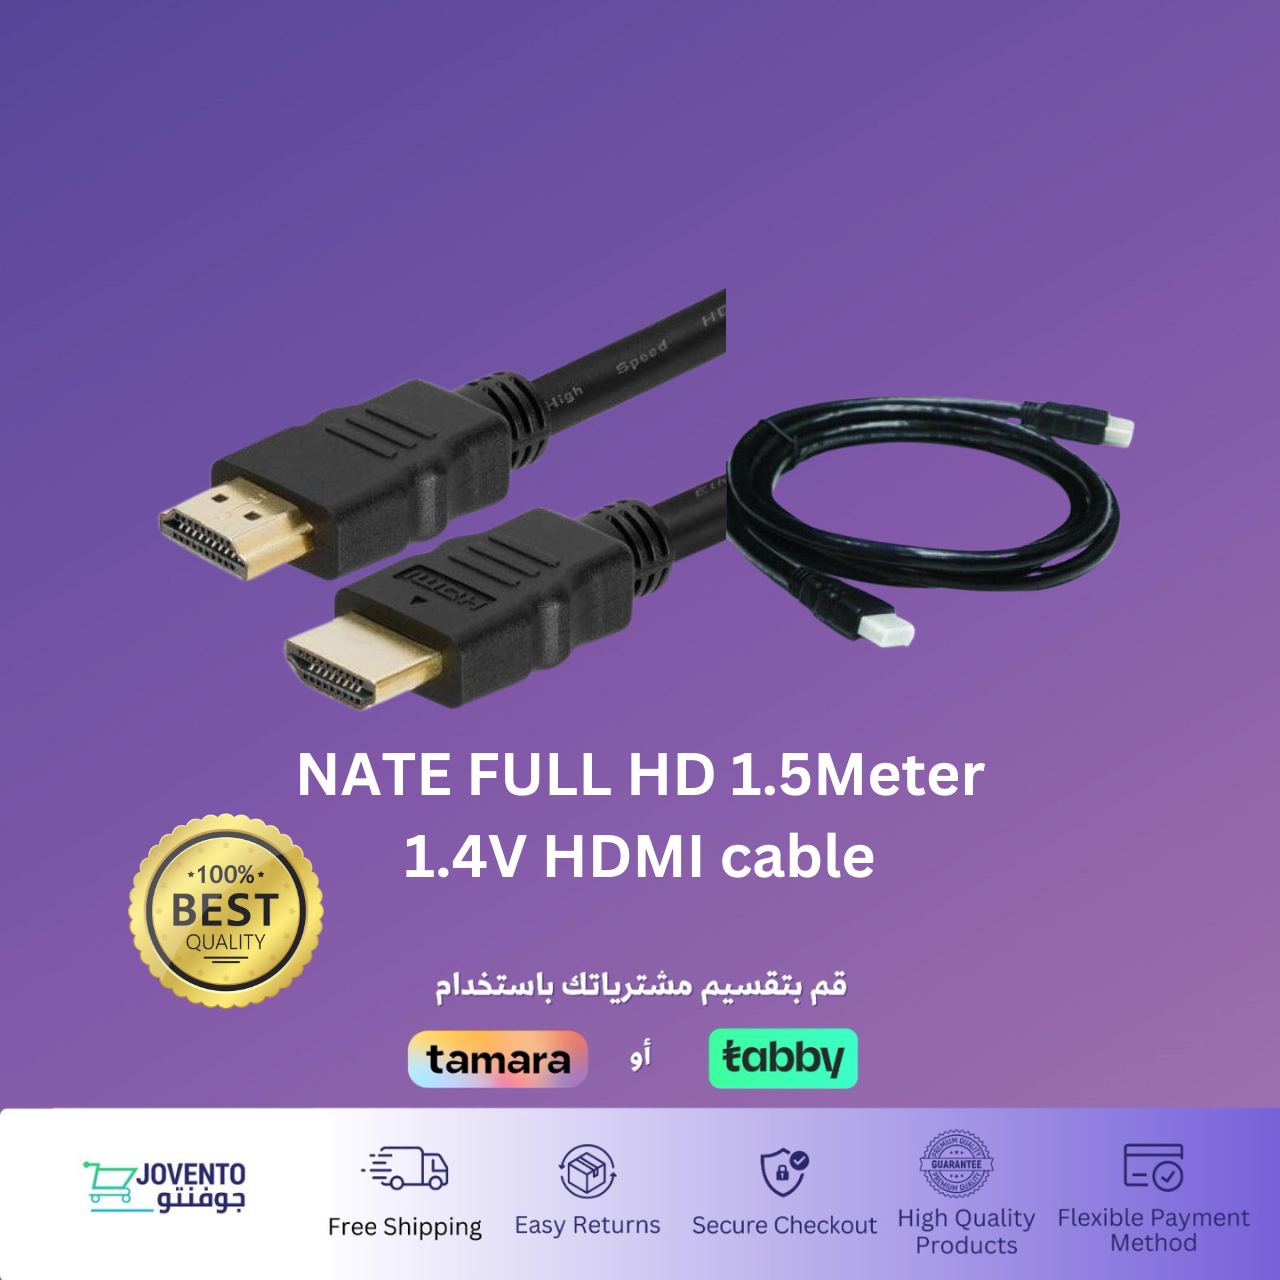 NATE 1.5M HDMI Cable - Support Full HD 1.4V